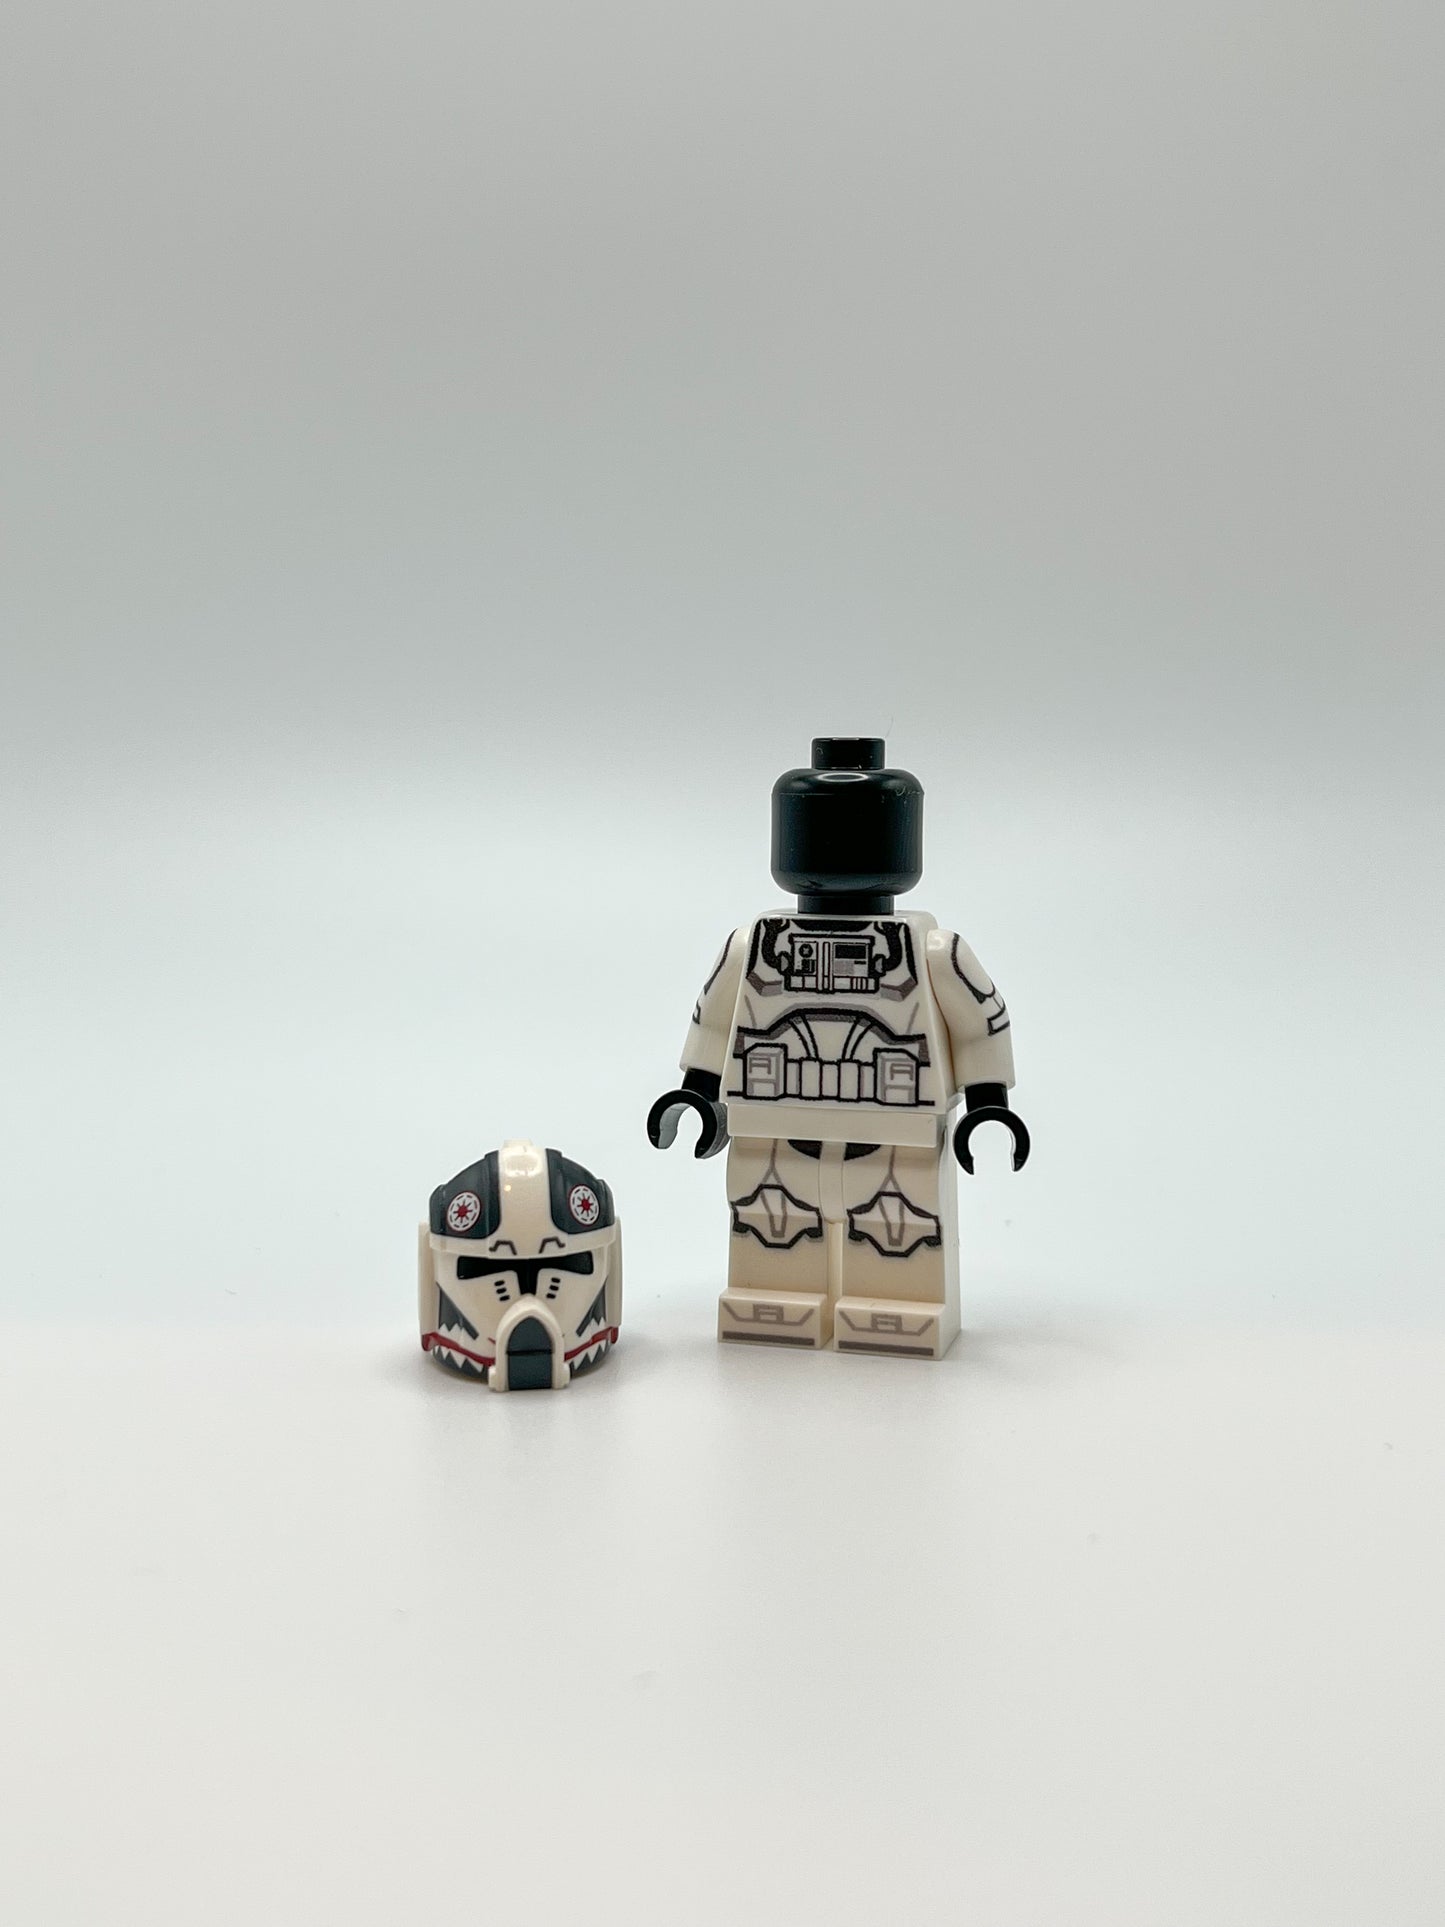 Custom Printed LEGO® Minifig Pilot Matchstick with Clone Army Customs pilot helmet on the ground